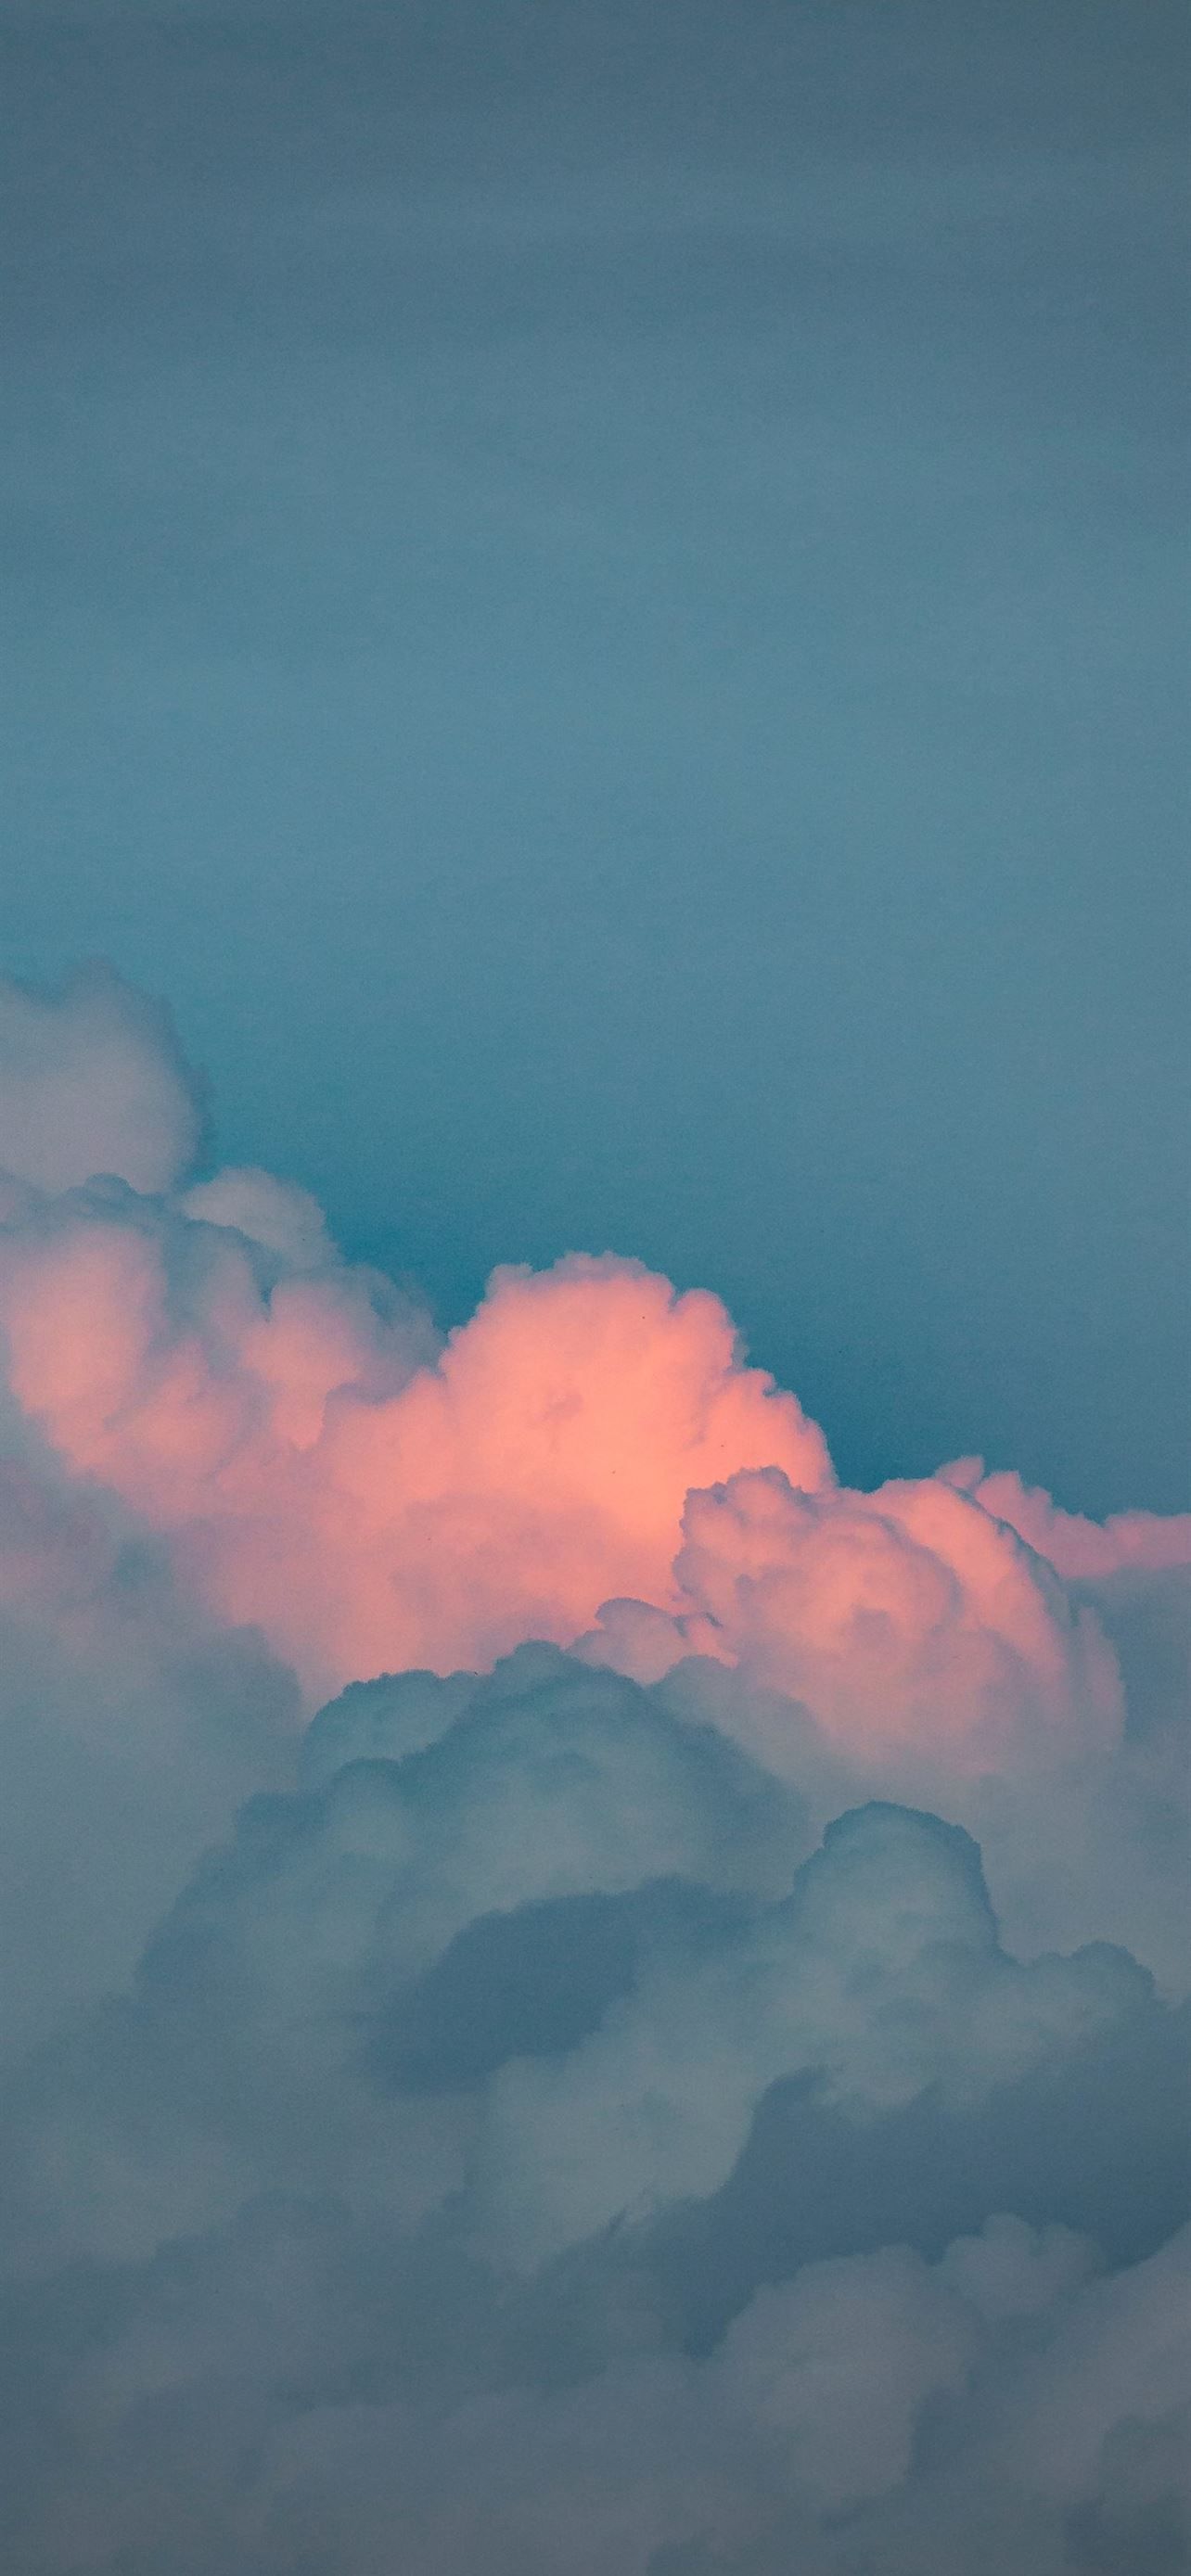 white clouds in blue sky iPhone Wallpaper Free Download